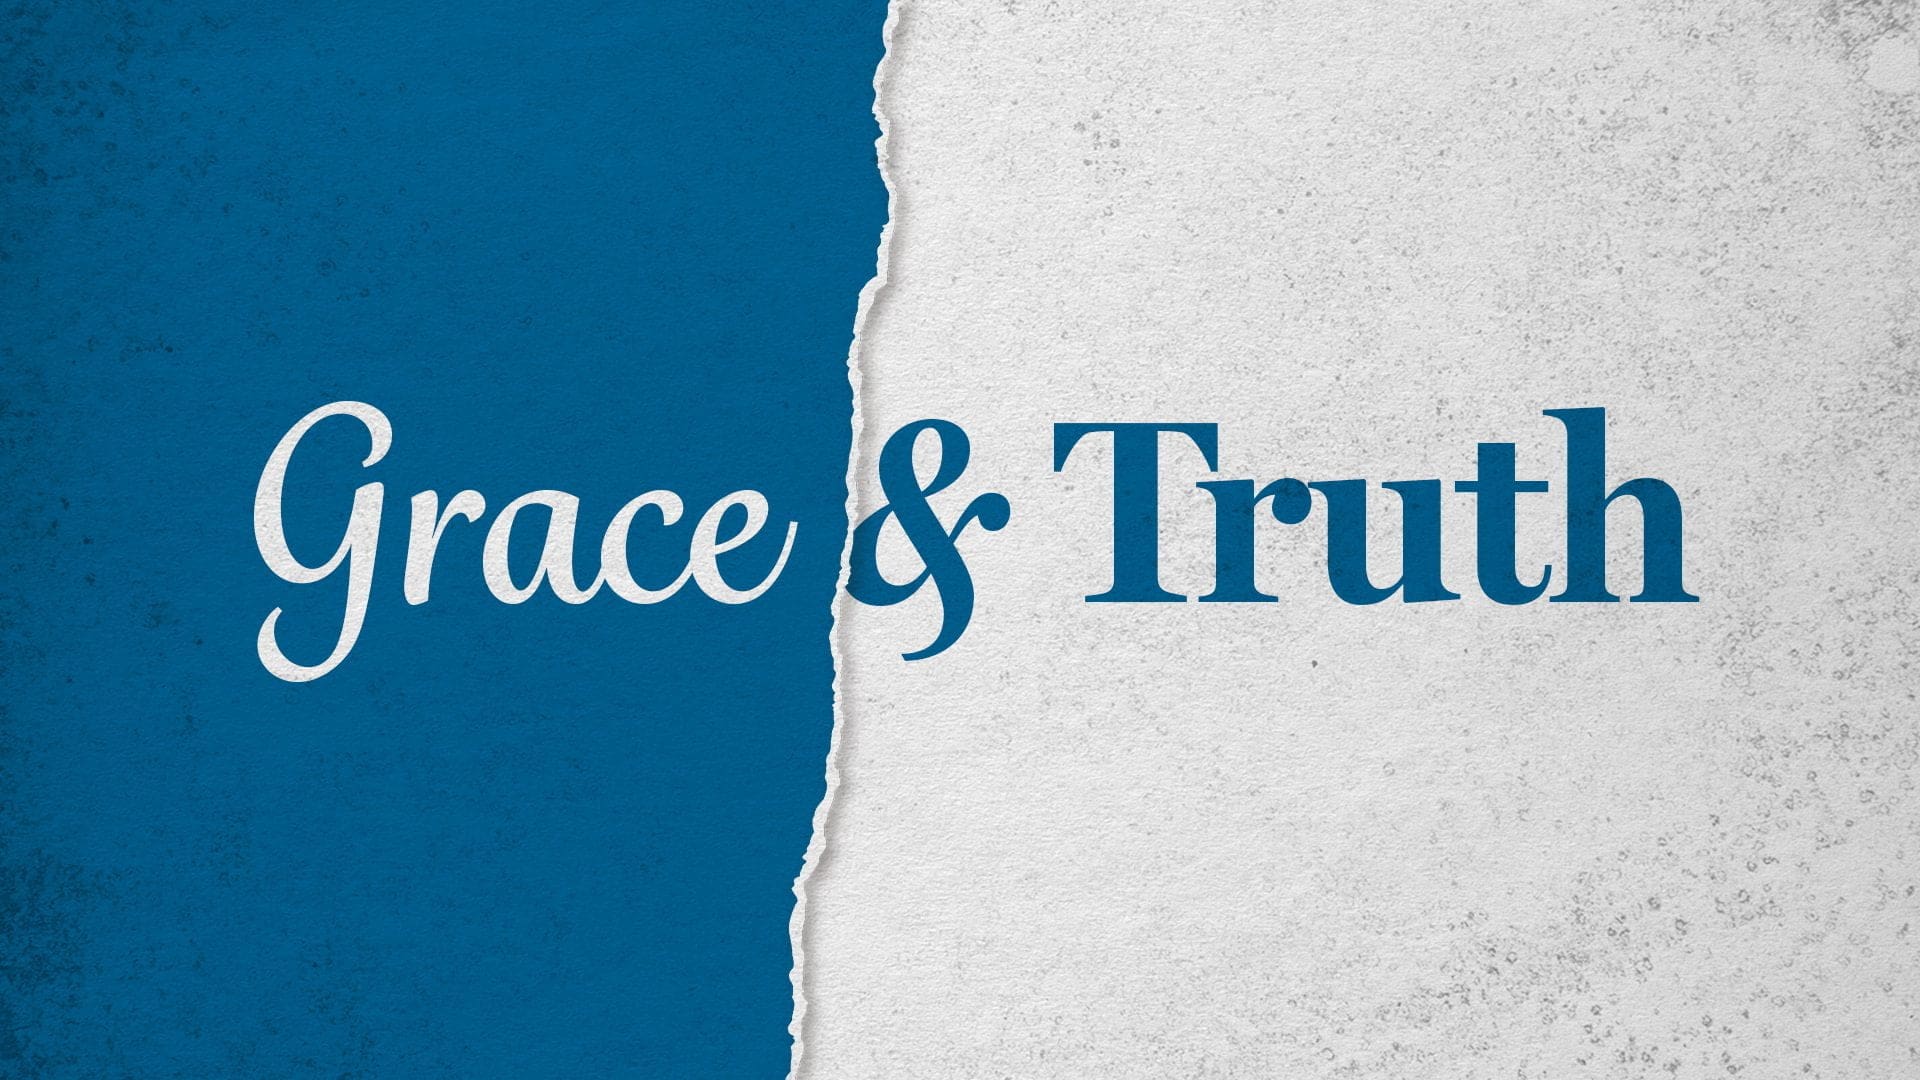 Grace and Truth Together Image